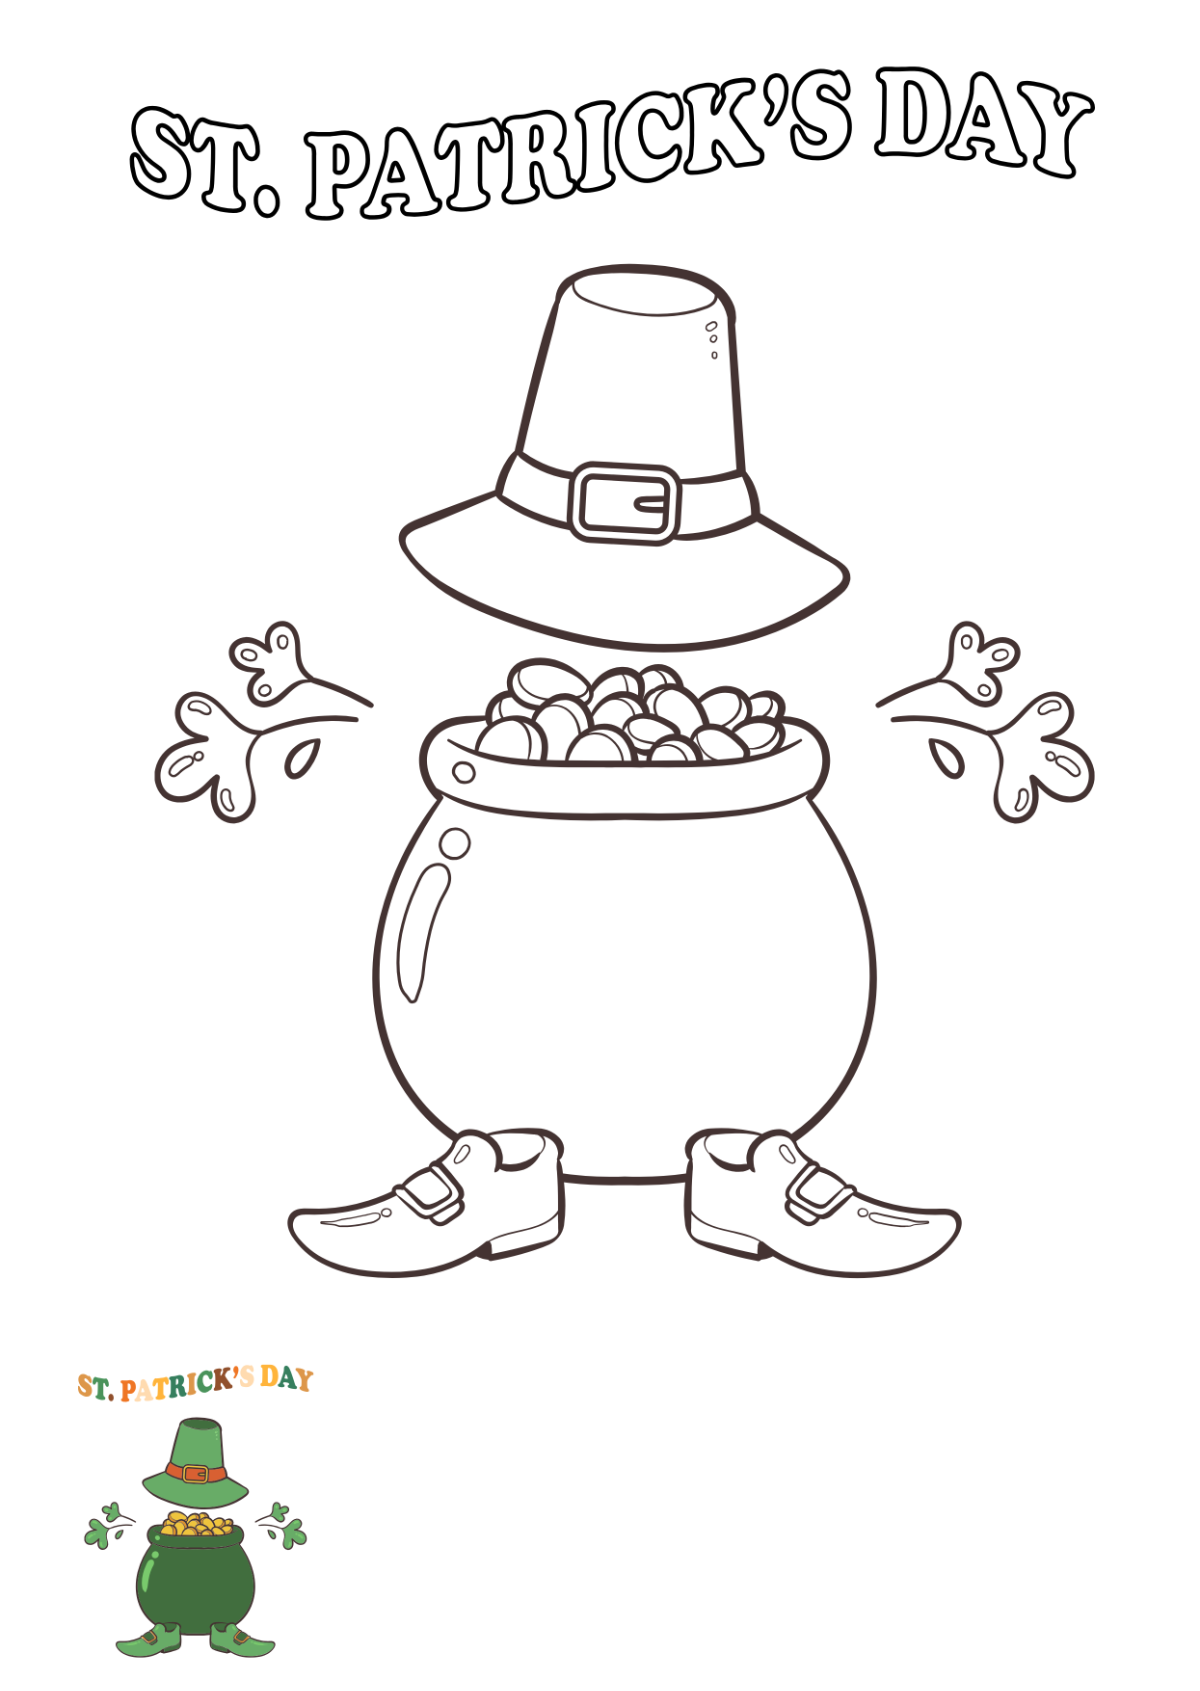 St. Patrick’s Day Coloring Page for Kids Template